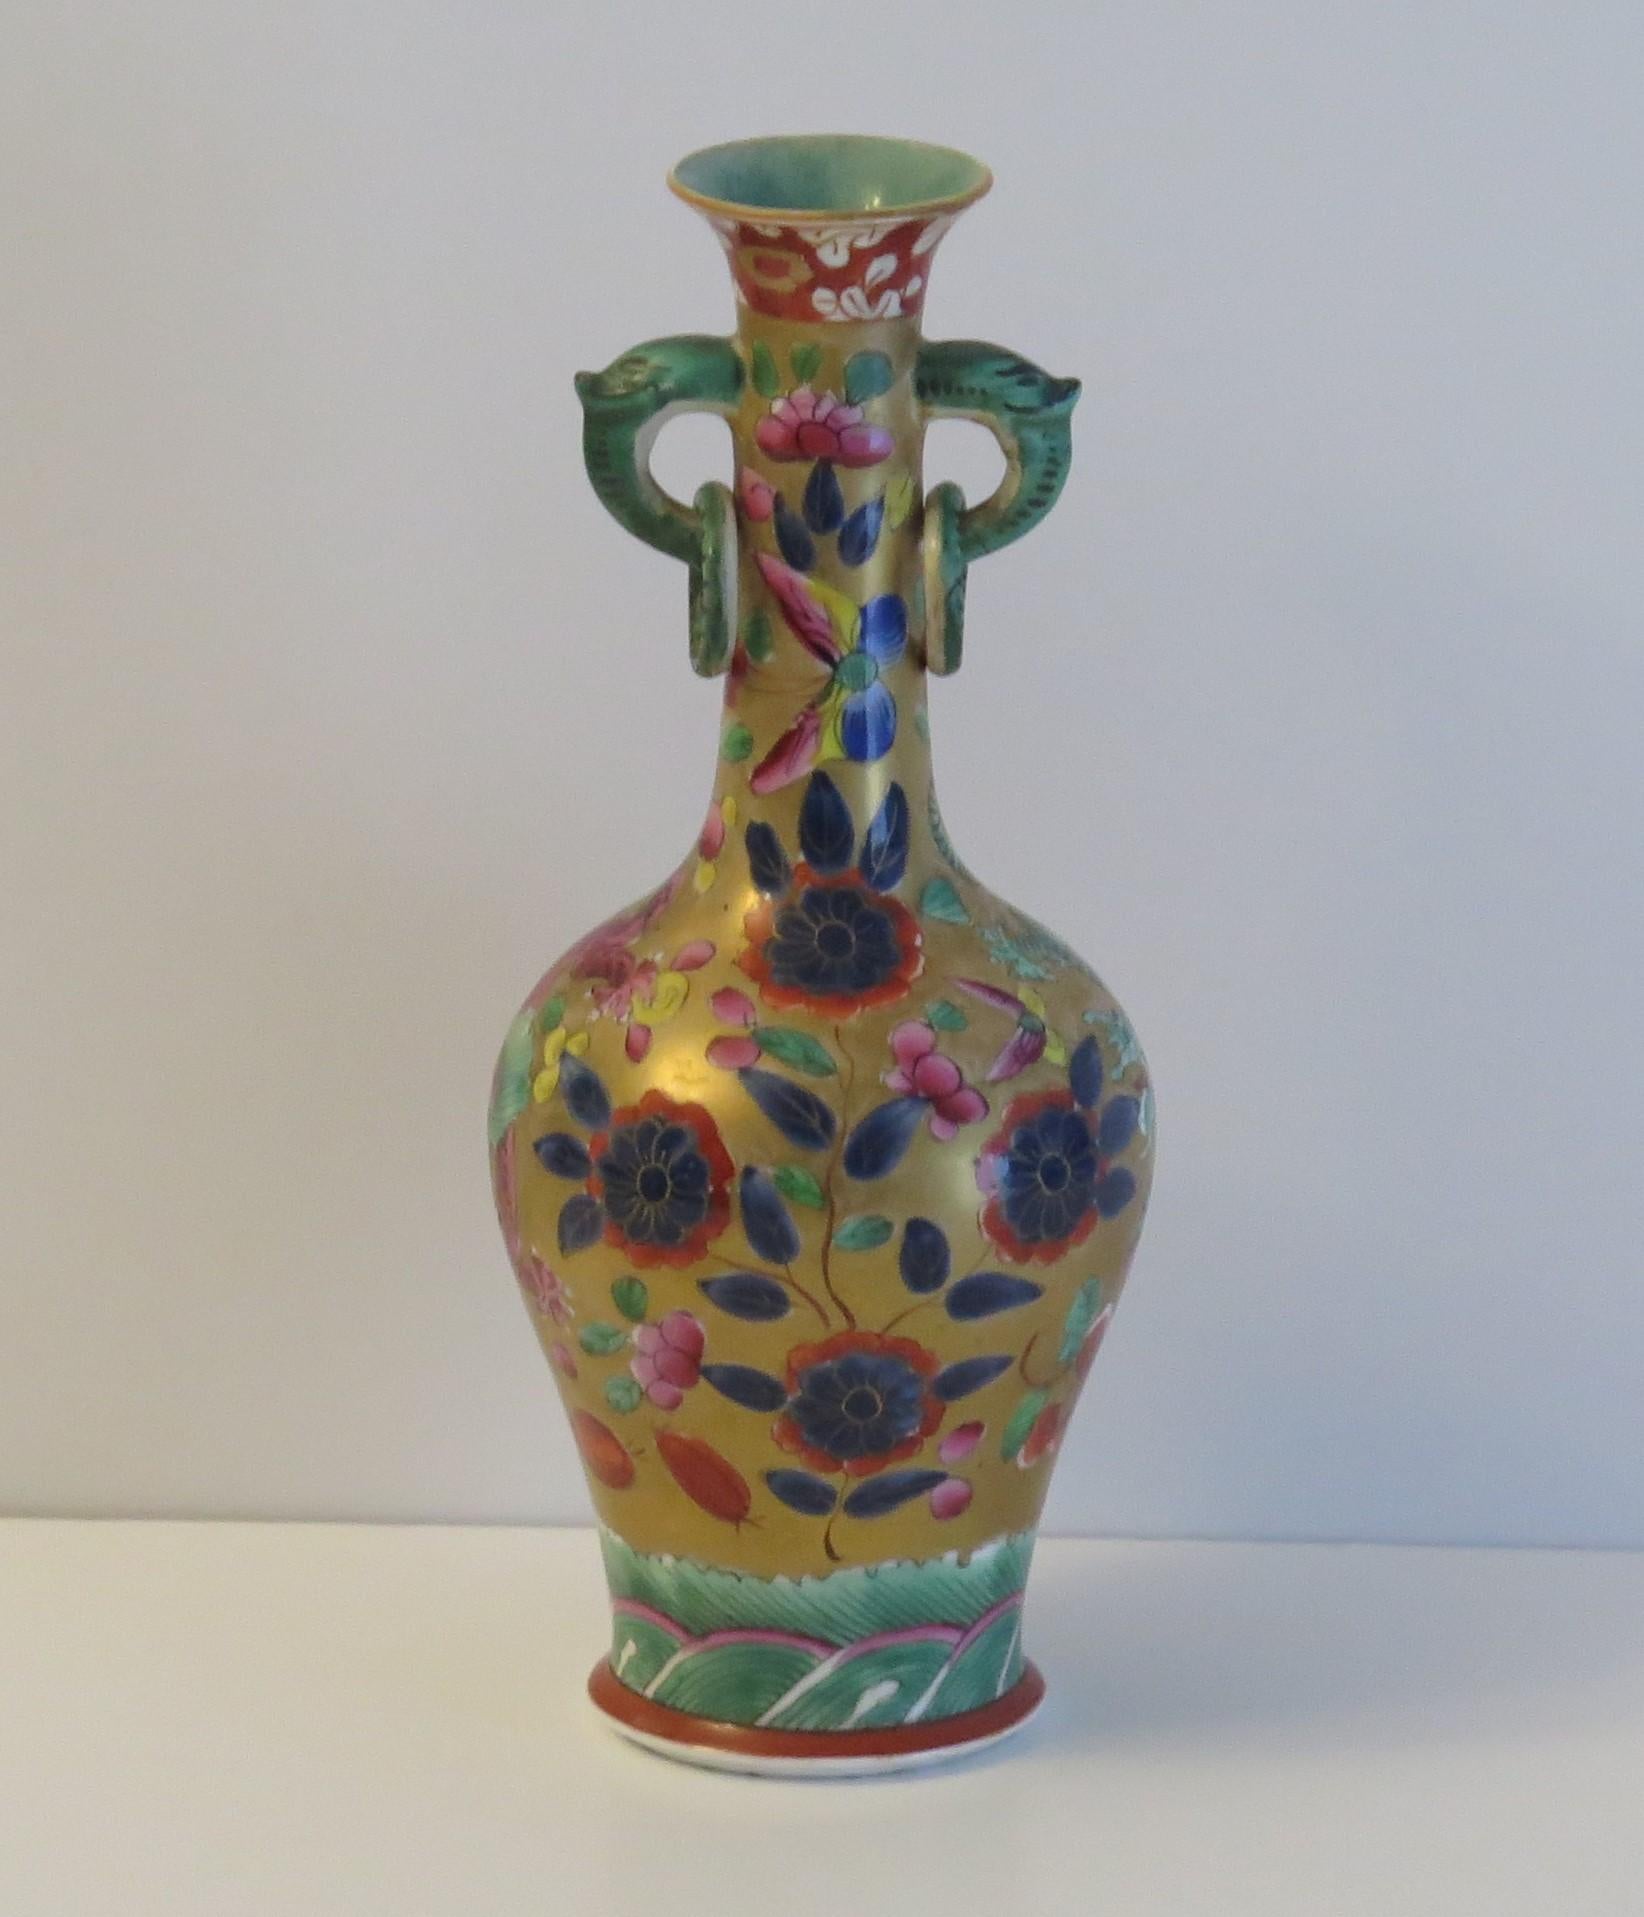 Very Rare Mason's Ironstone Bottle Vase in Chinese Dragon Pattern, circa 1820 For Sale 1